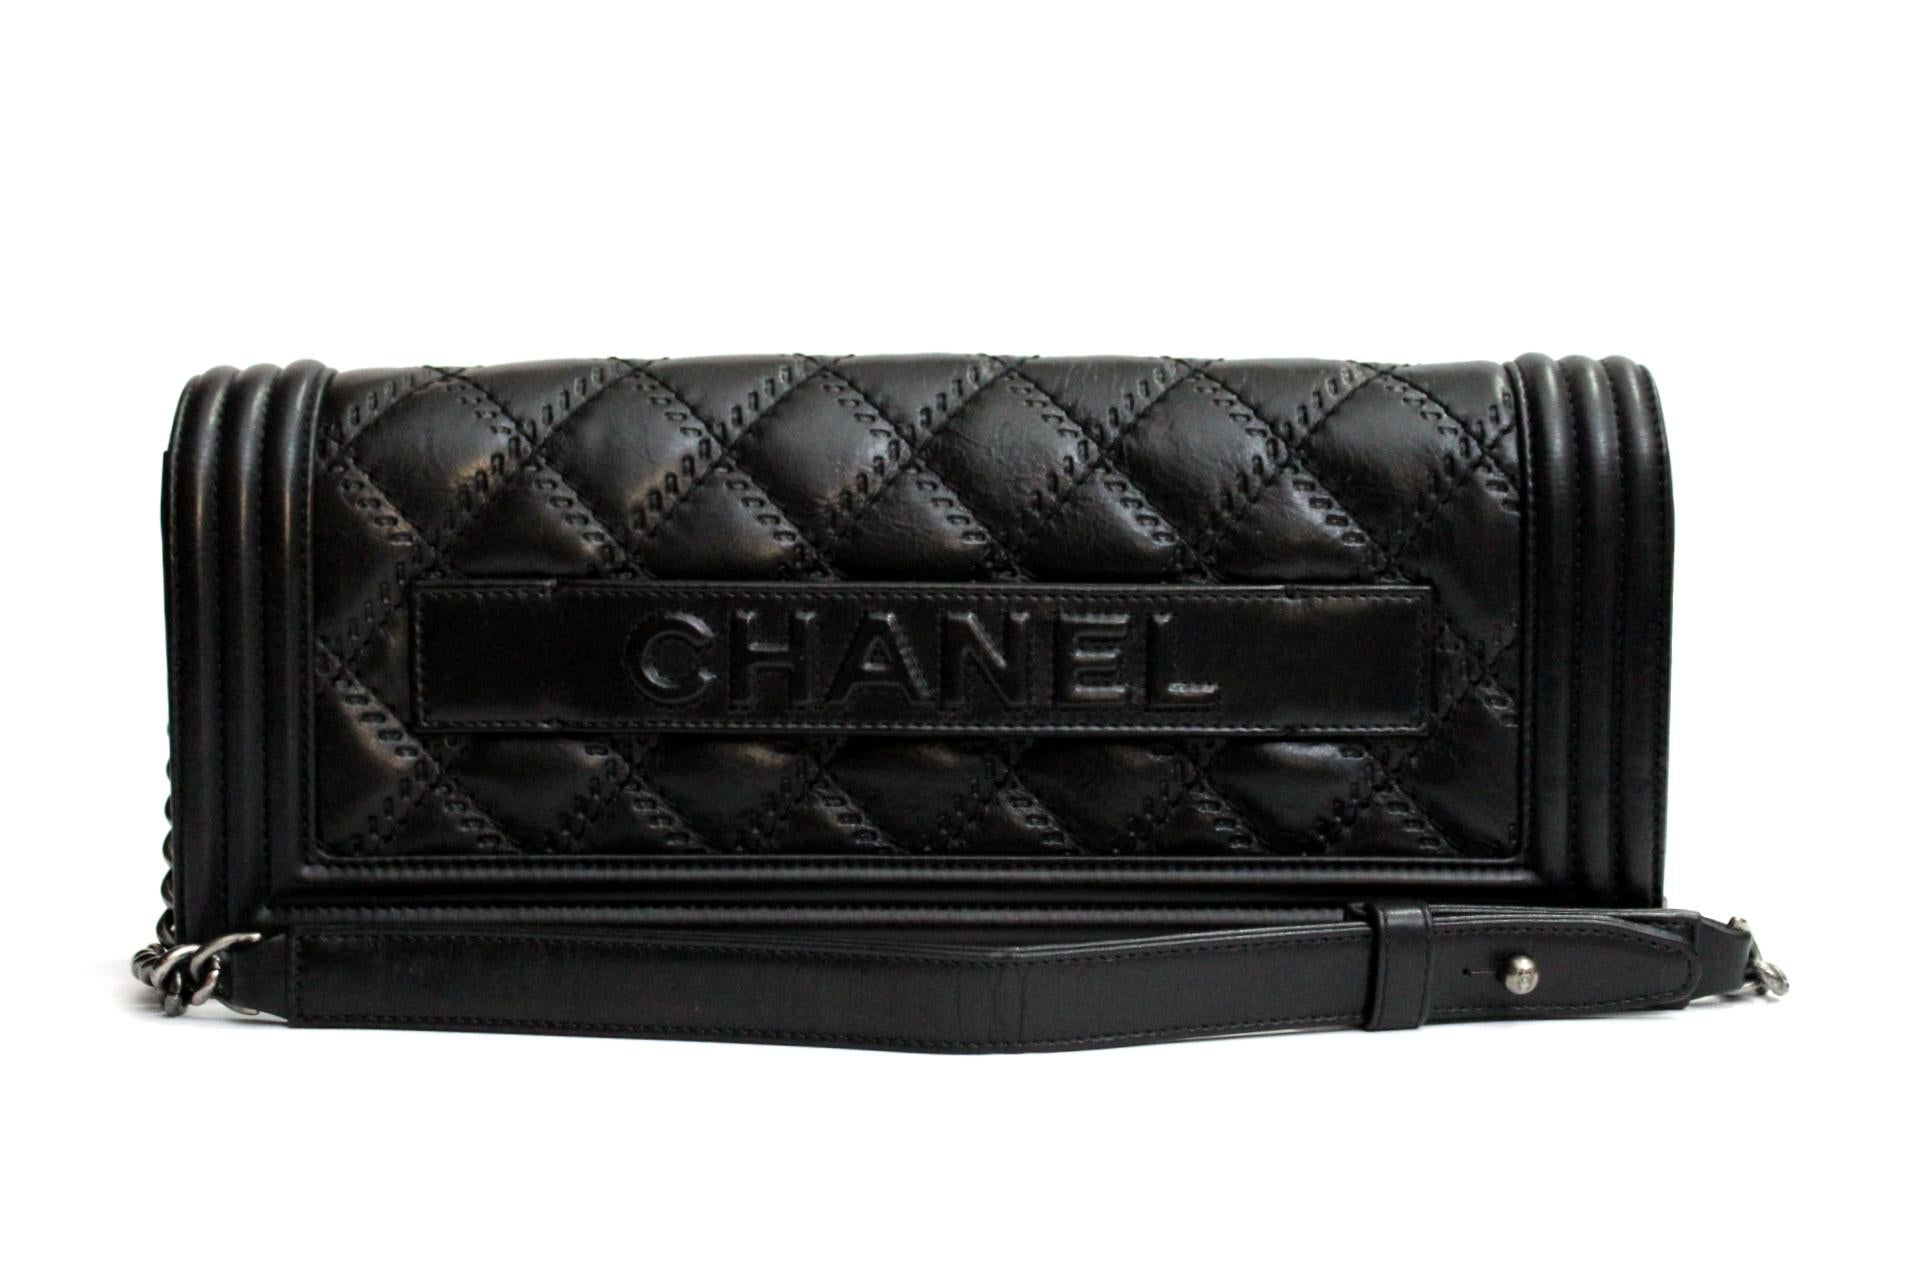 Chanel Boy Long in black quilted leather and silver hardware.
It has a chain handle that will allow you to wear it comfortably on your shoulder.
Internally discreetly capacious, perfect for your essential objects, with pockets.
This Chanel is in